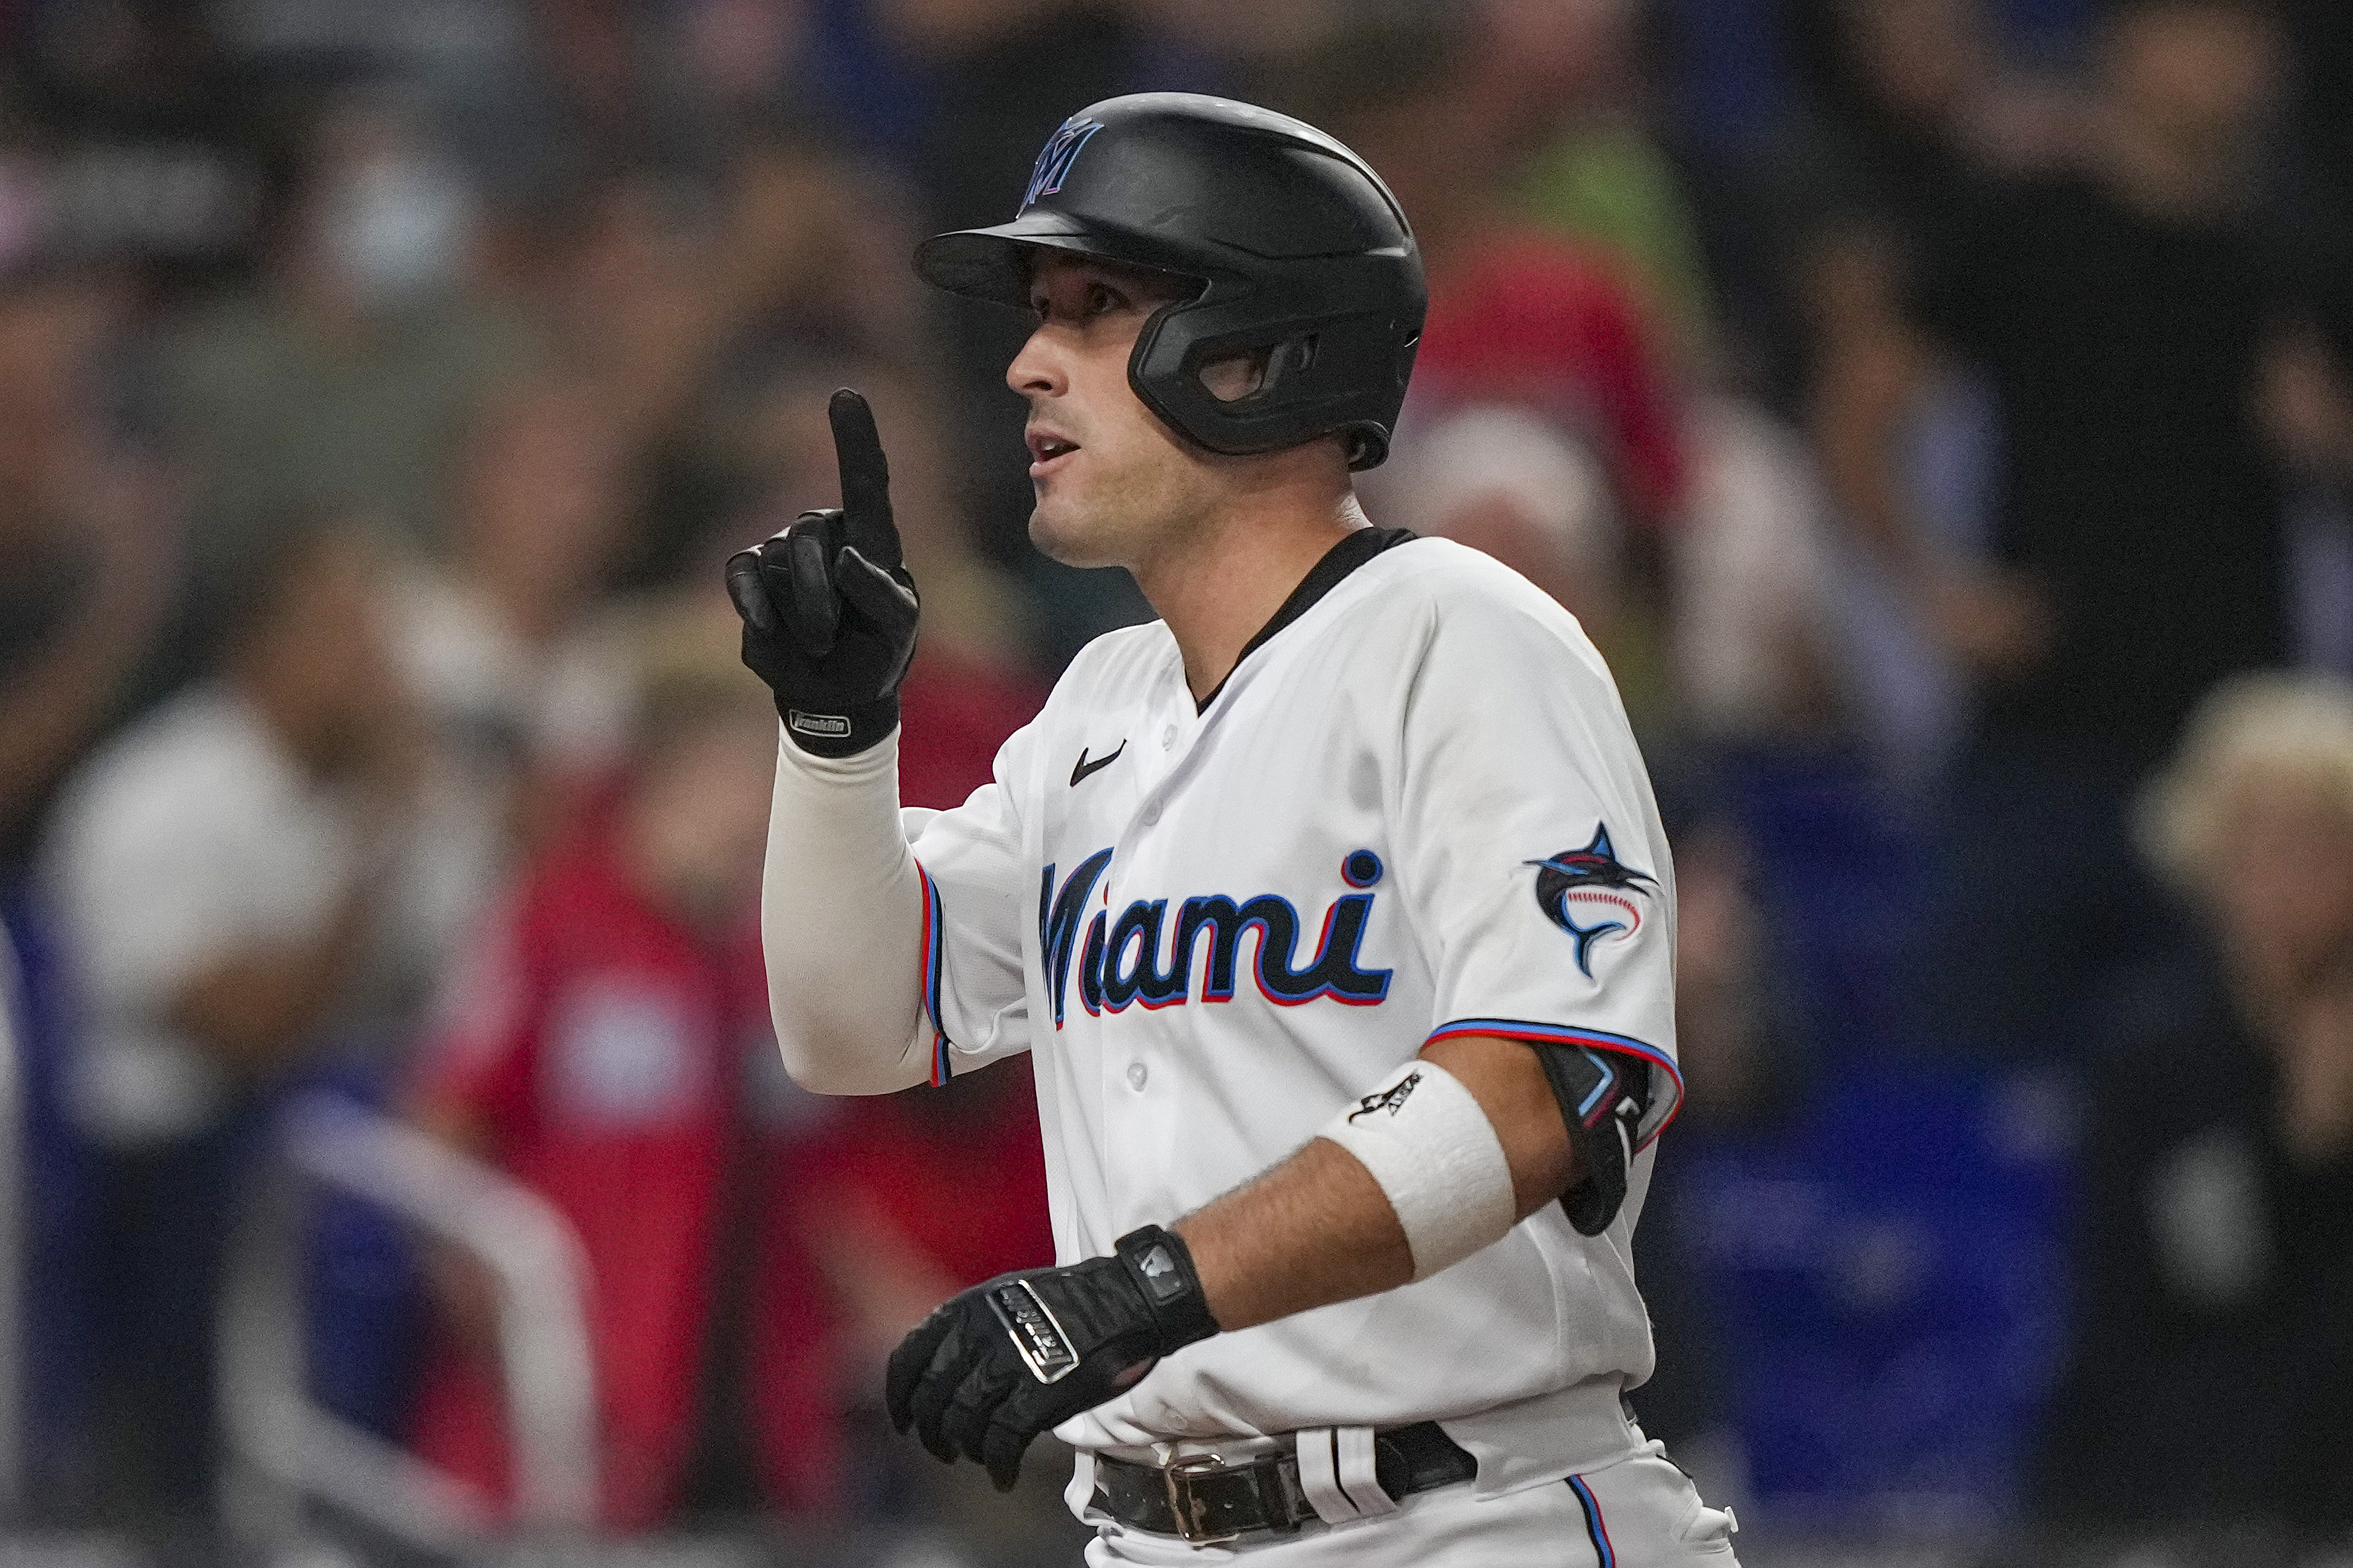 Nick Fortes #54 of the Miami Marlins celebrates as he heads towards home plate after hitting his second home run of the game in the fourth inning against the San Diego Padres at loanDepot park on August 16, 2022 in Miami, Florida.